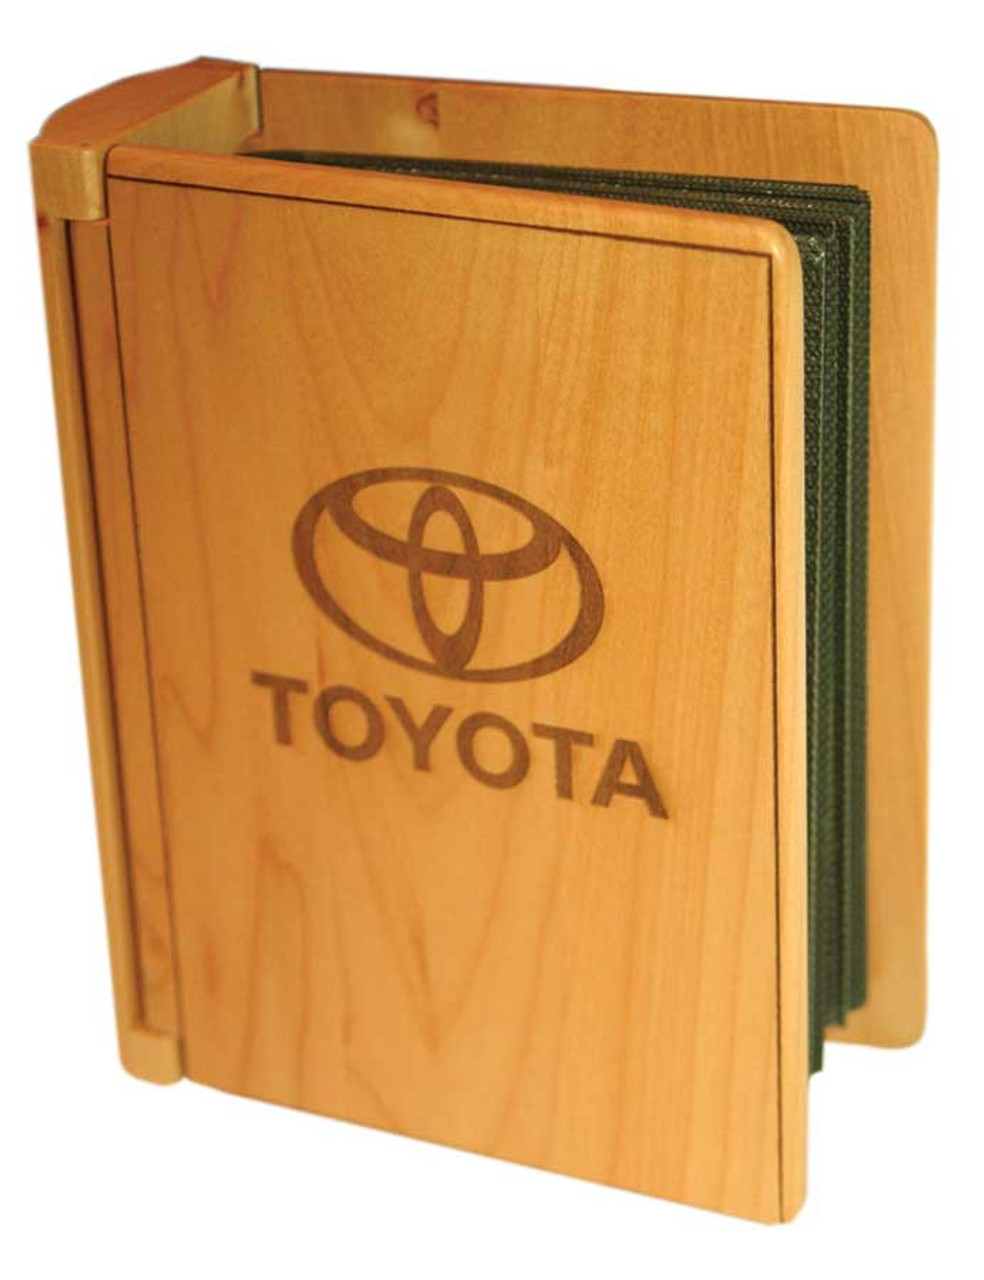 Personalized Wood Photo Album in Maple & Rosewood - Northwest Gifts